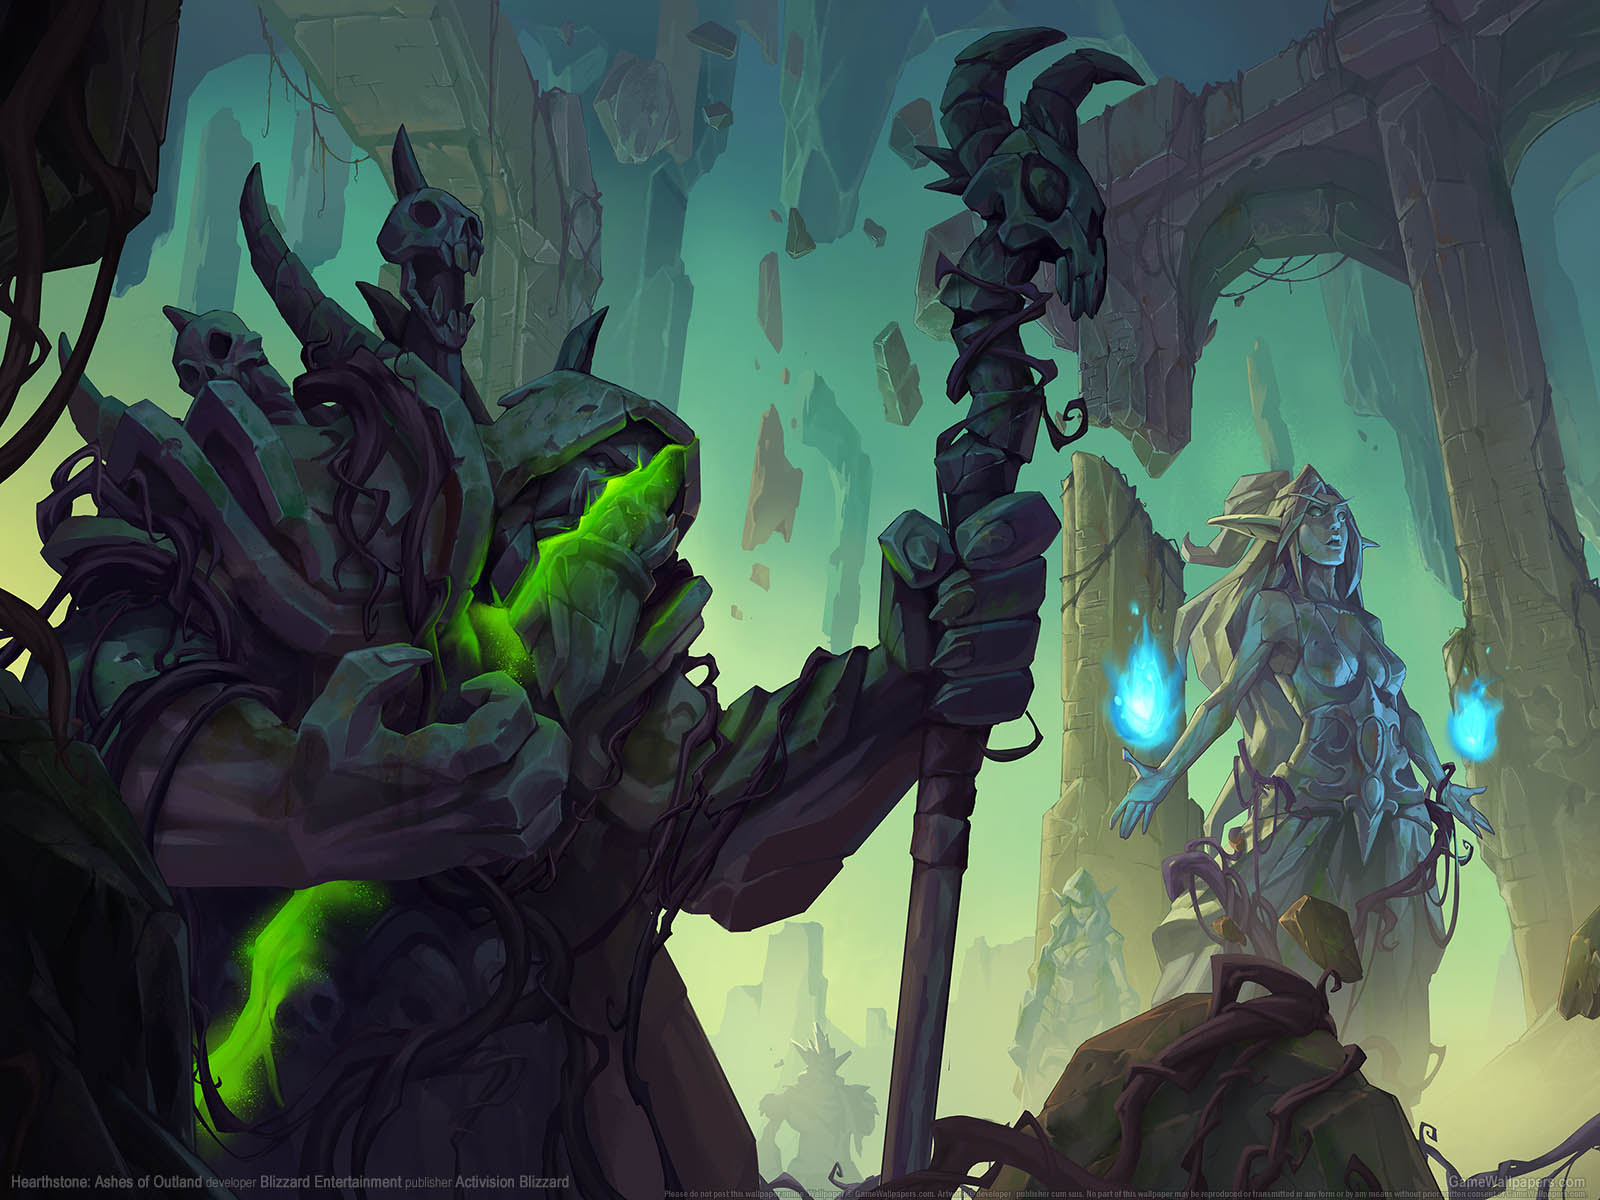 Hearthstone%25253A Ashes of Outland wallpaper 01 1600x1200